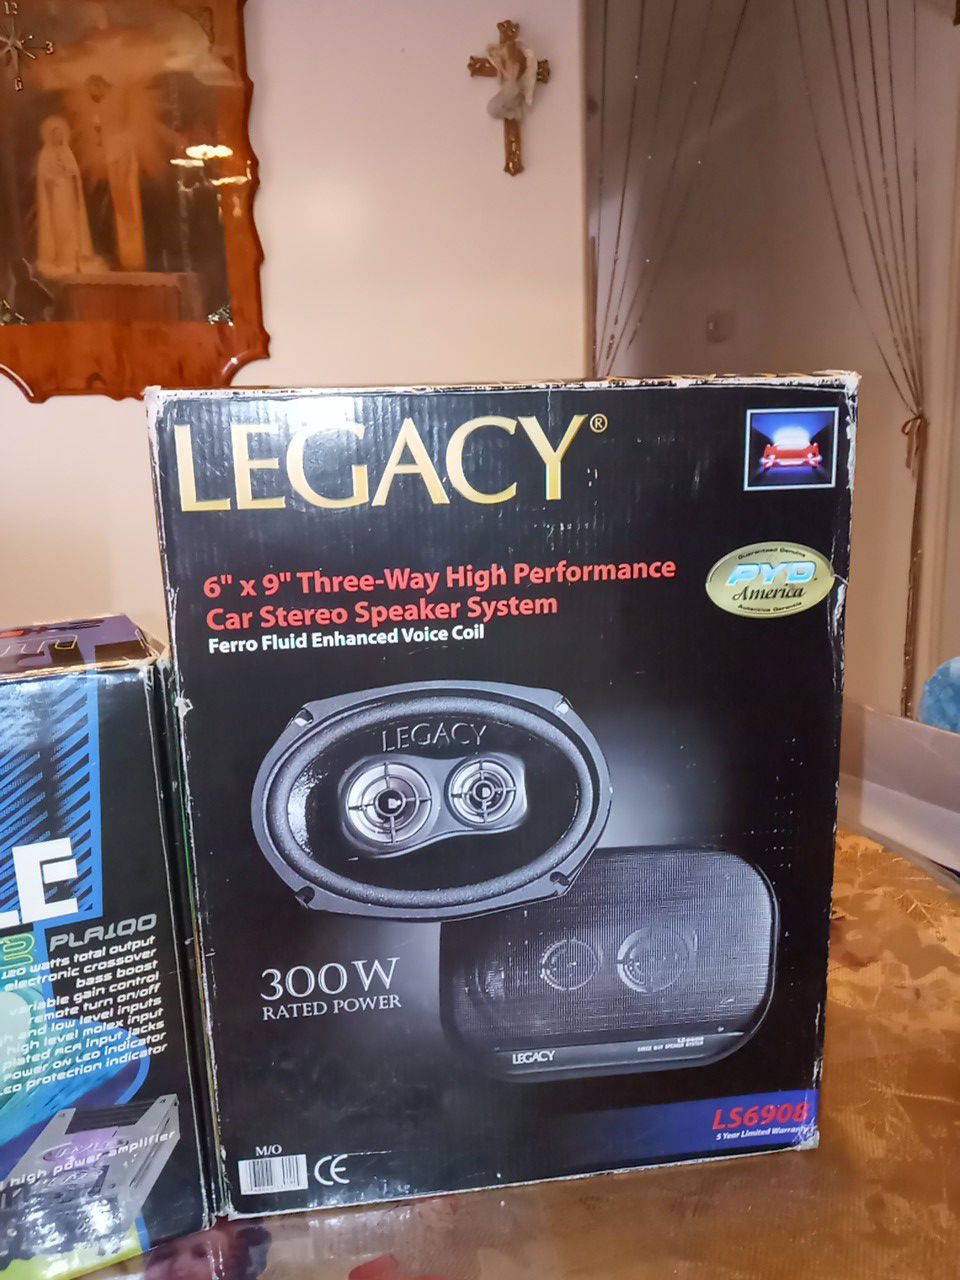 300 W Legacy car stereo speaker system and pyle amplifier